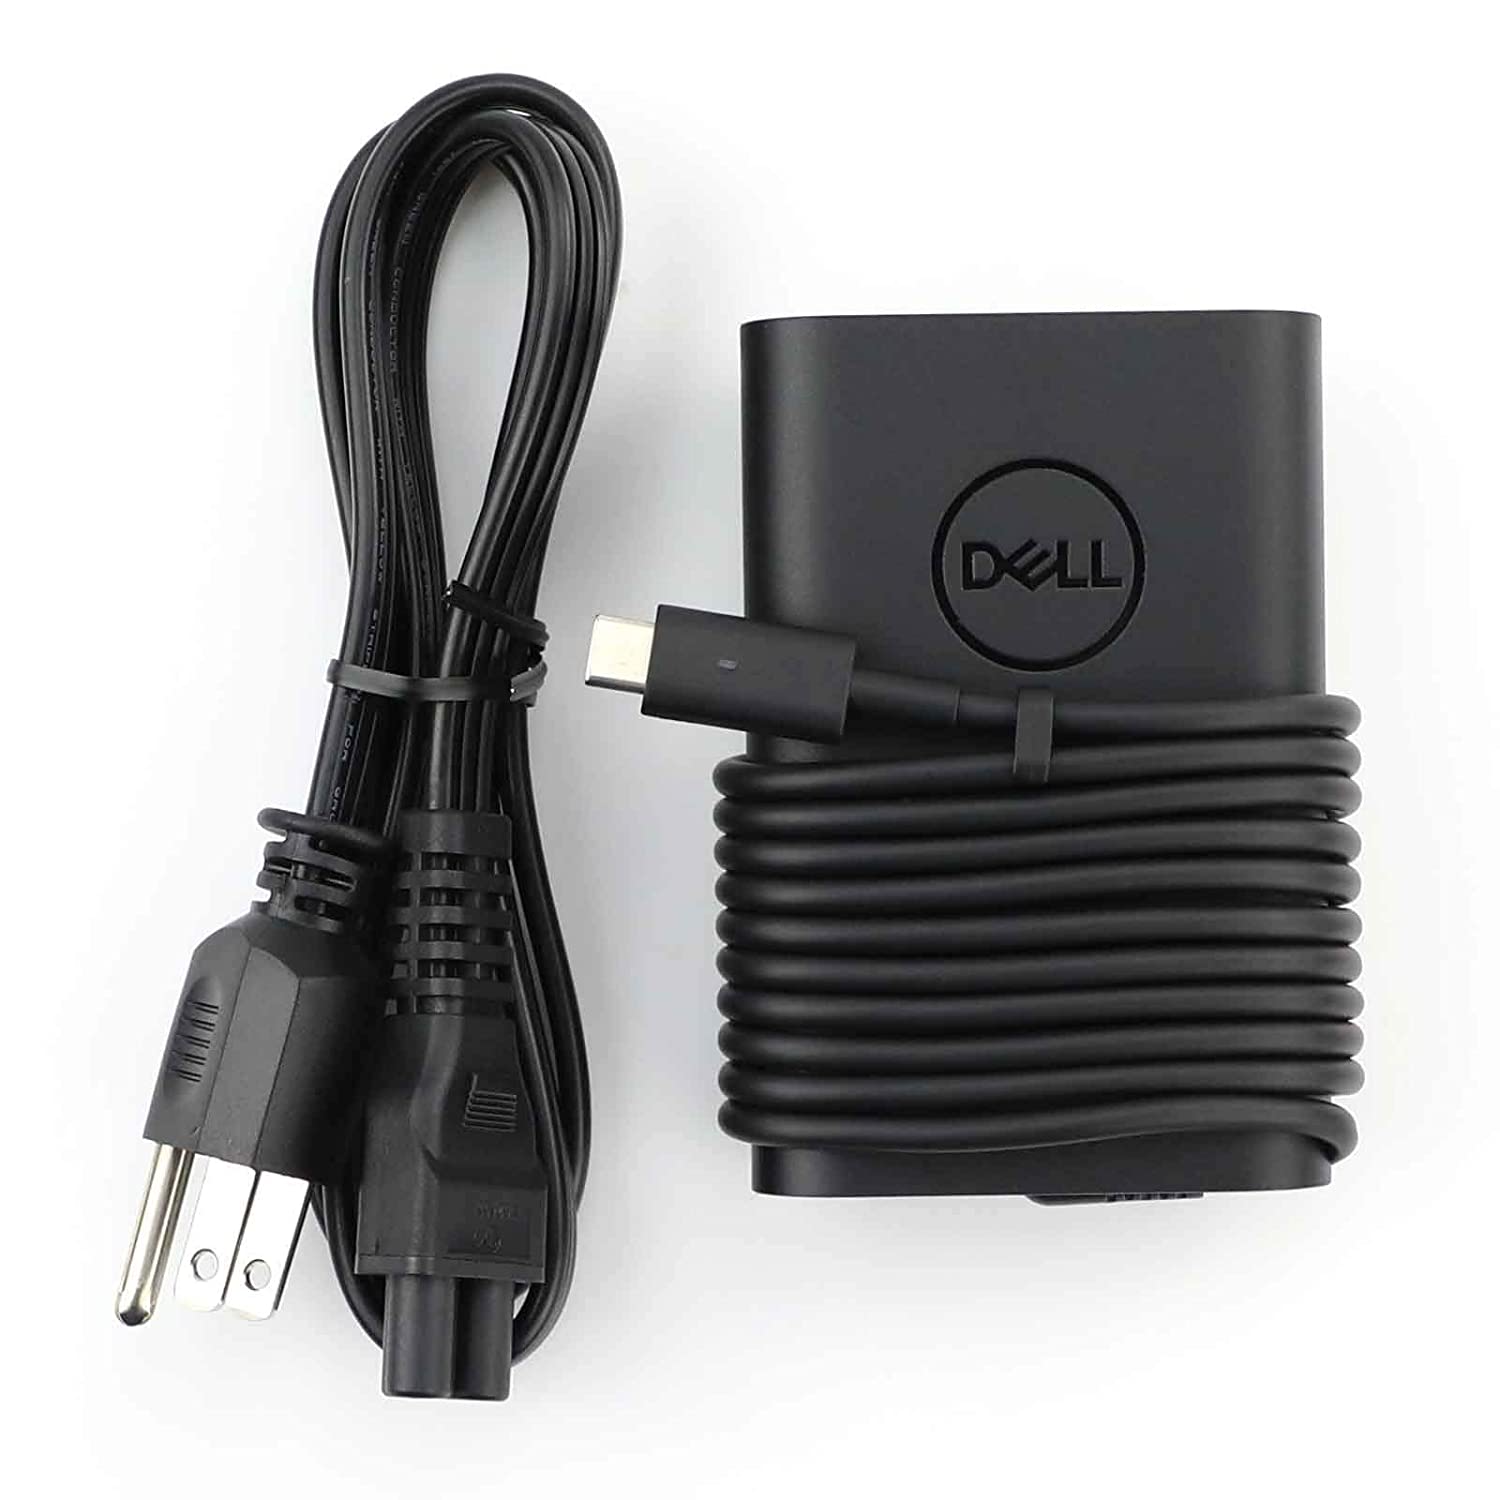 New Dell Laptop Charger 65W(Watt) AC Power Adapter With Type c(USB-C/USBC) Tip Include Power Cord For XPS 12, 9250 XPS 13 9350 9360 9365 9370 9380, Latitude 7370 7280 7480 5480 7275 5290 7490 - image 3 of 6